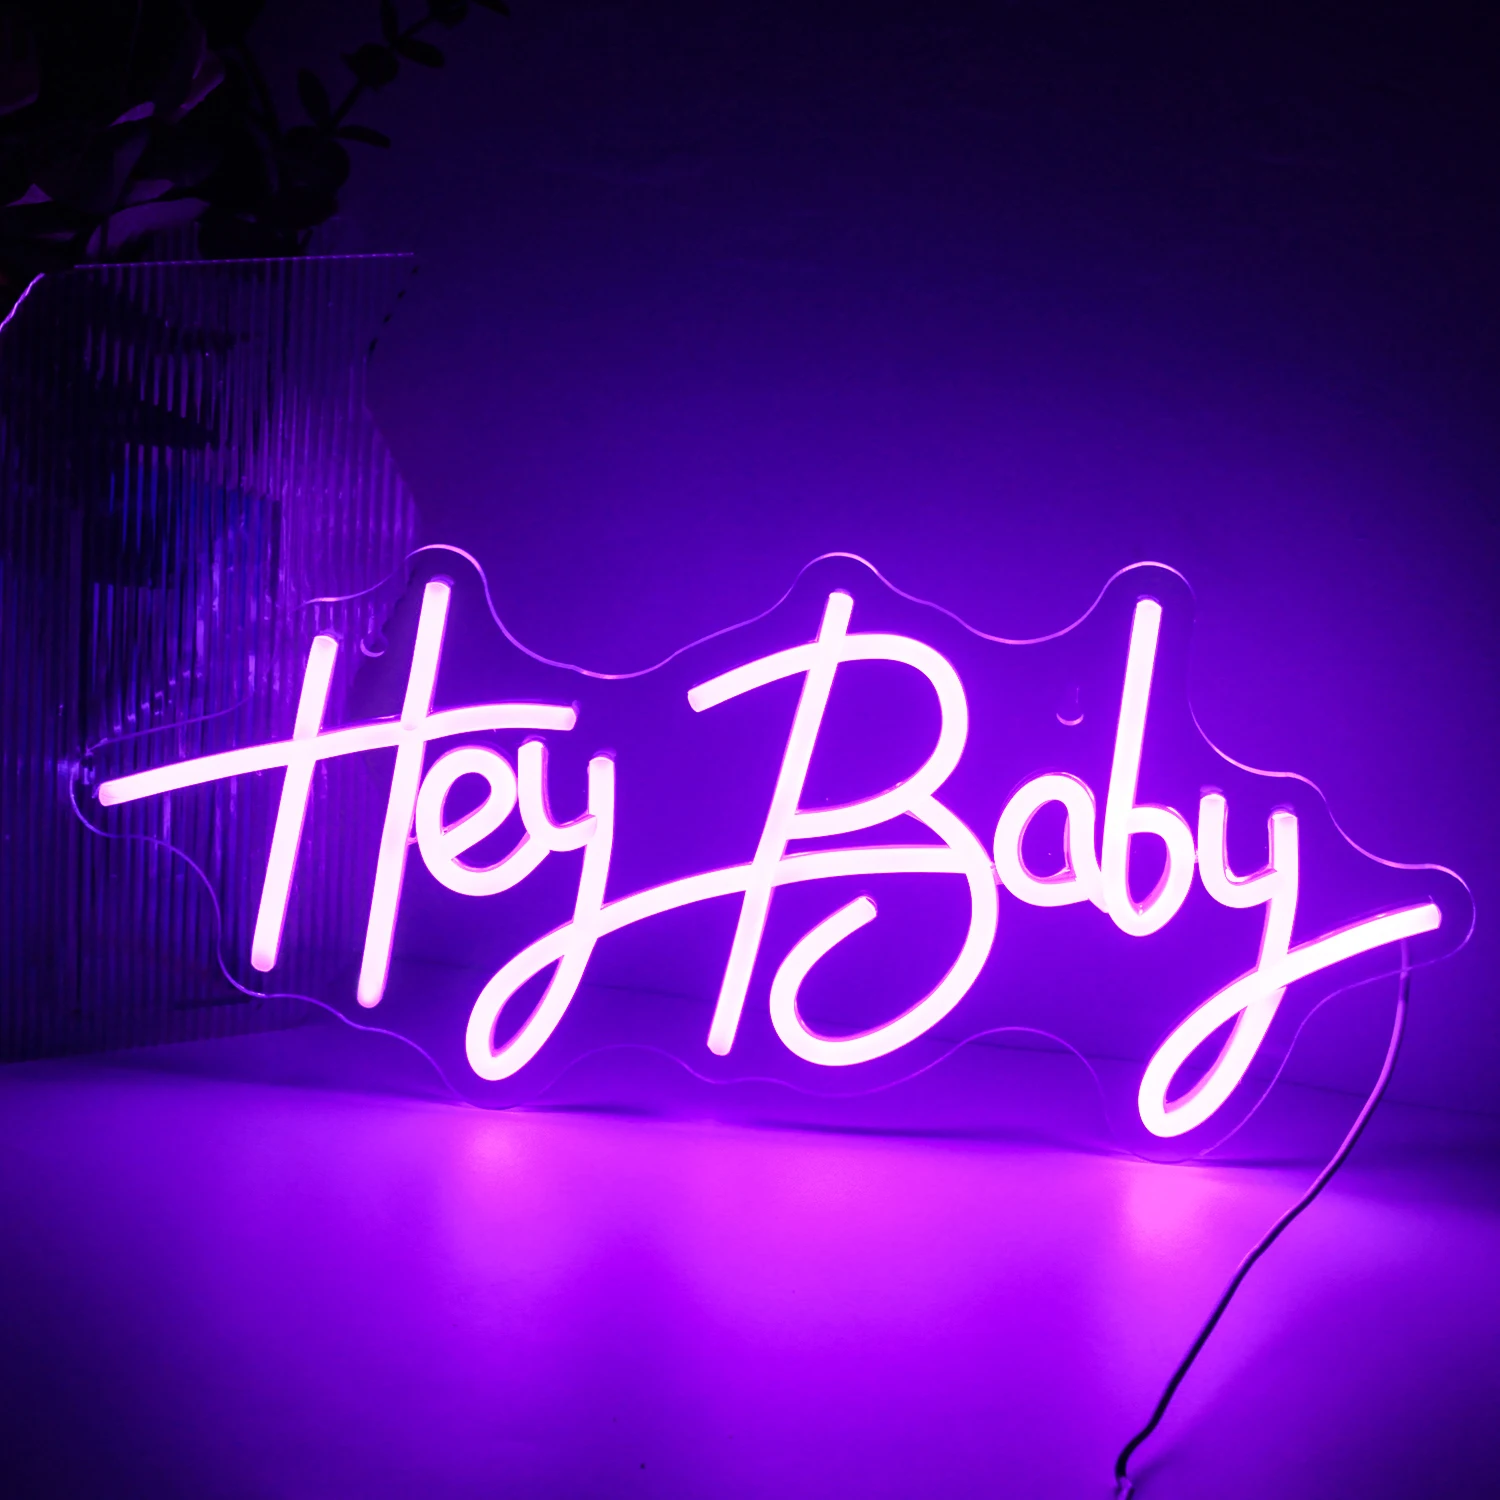 Ineonlife Neon Lights Hey Baby Sign LED Lamps Wedding Proposal Party ART Decorations Children Birthday Room Colour Lights ineonlife neon lights hey baby sign led lamps wedding proposal party art decorations children birthday room colour lights